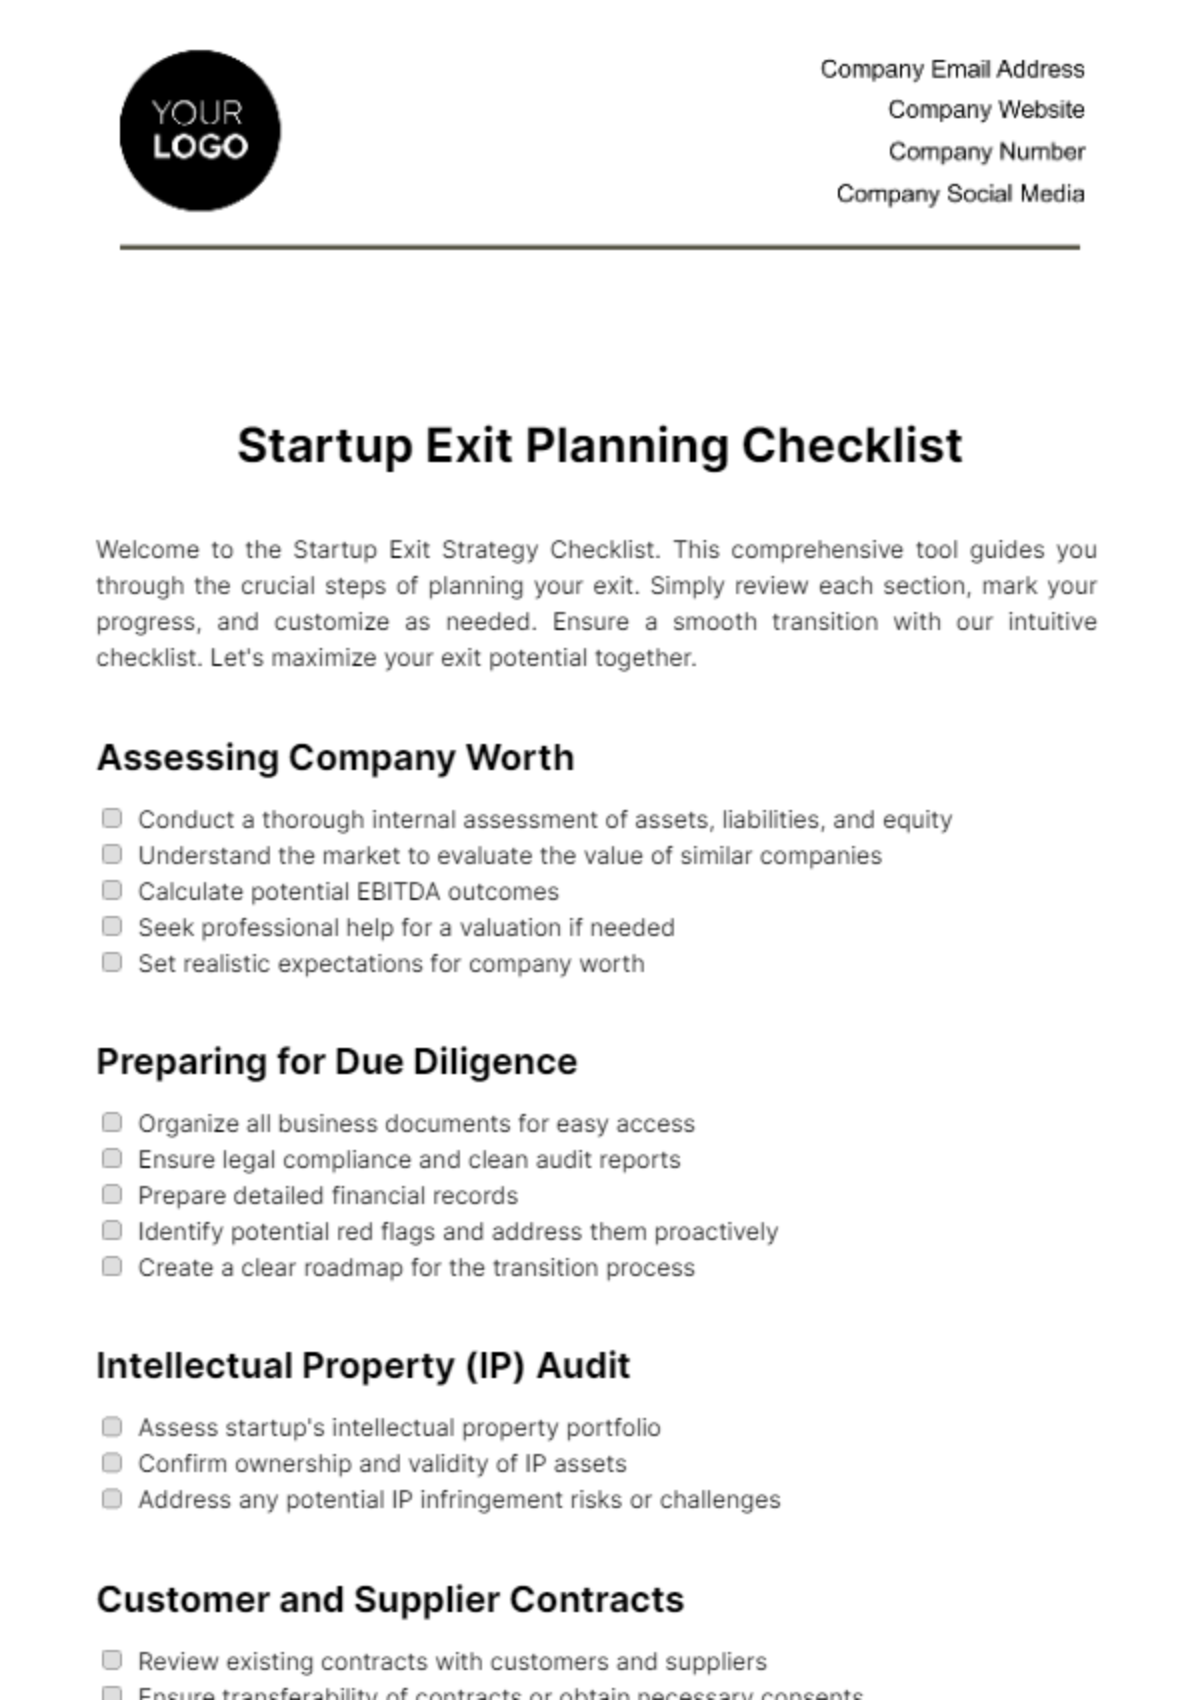 Free Startup Exit Strategy Checklist Template